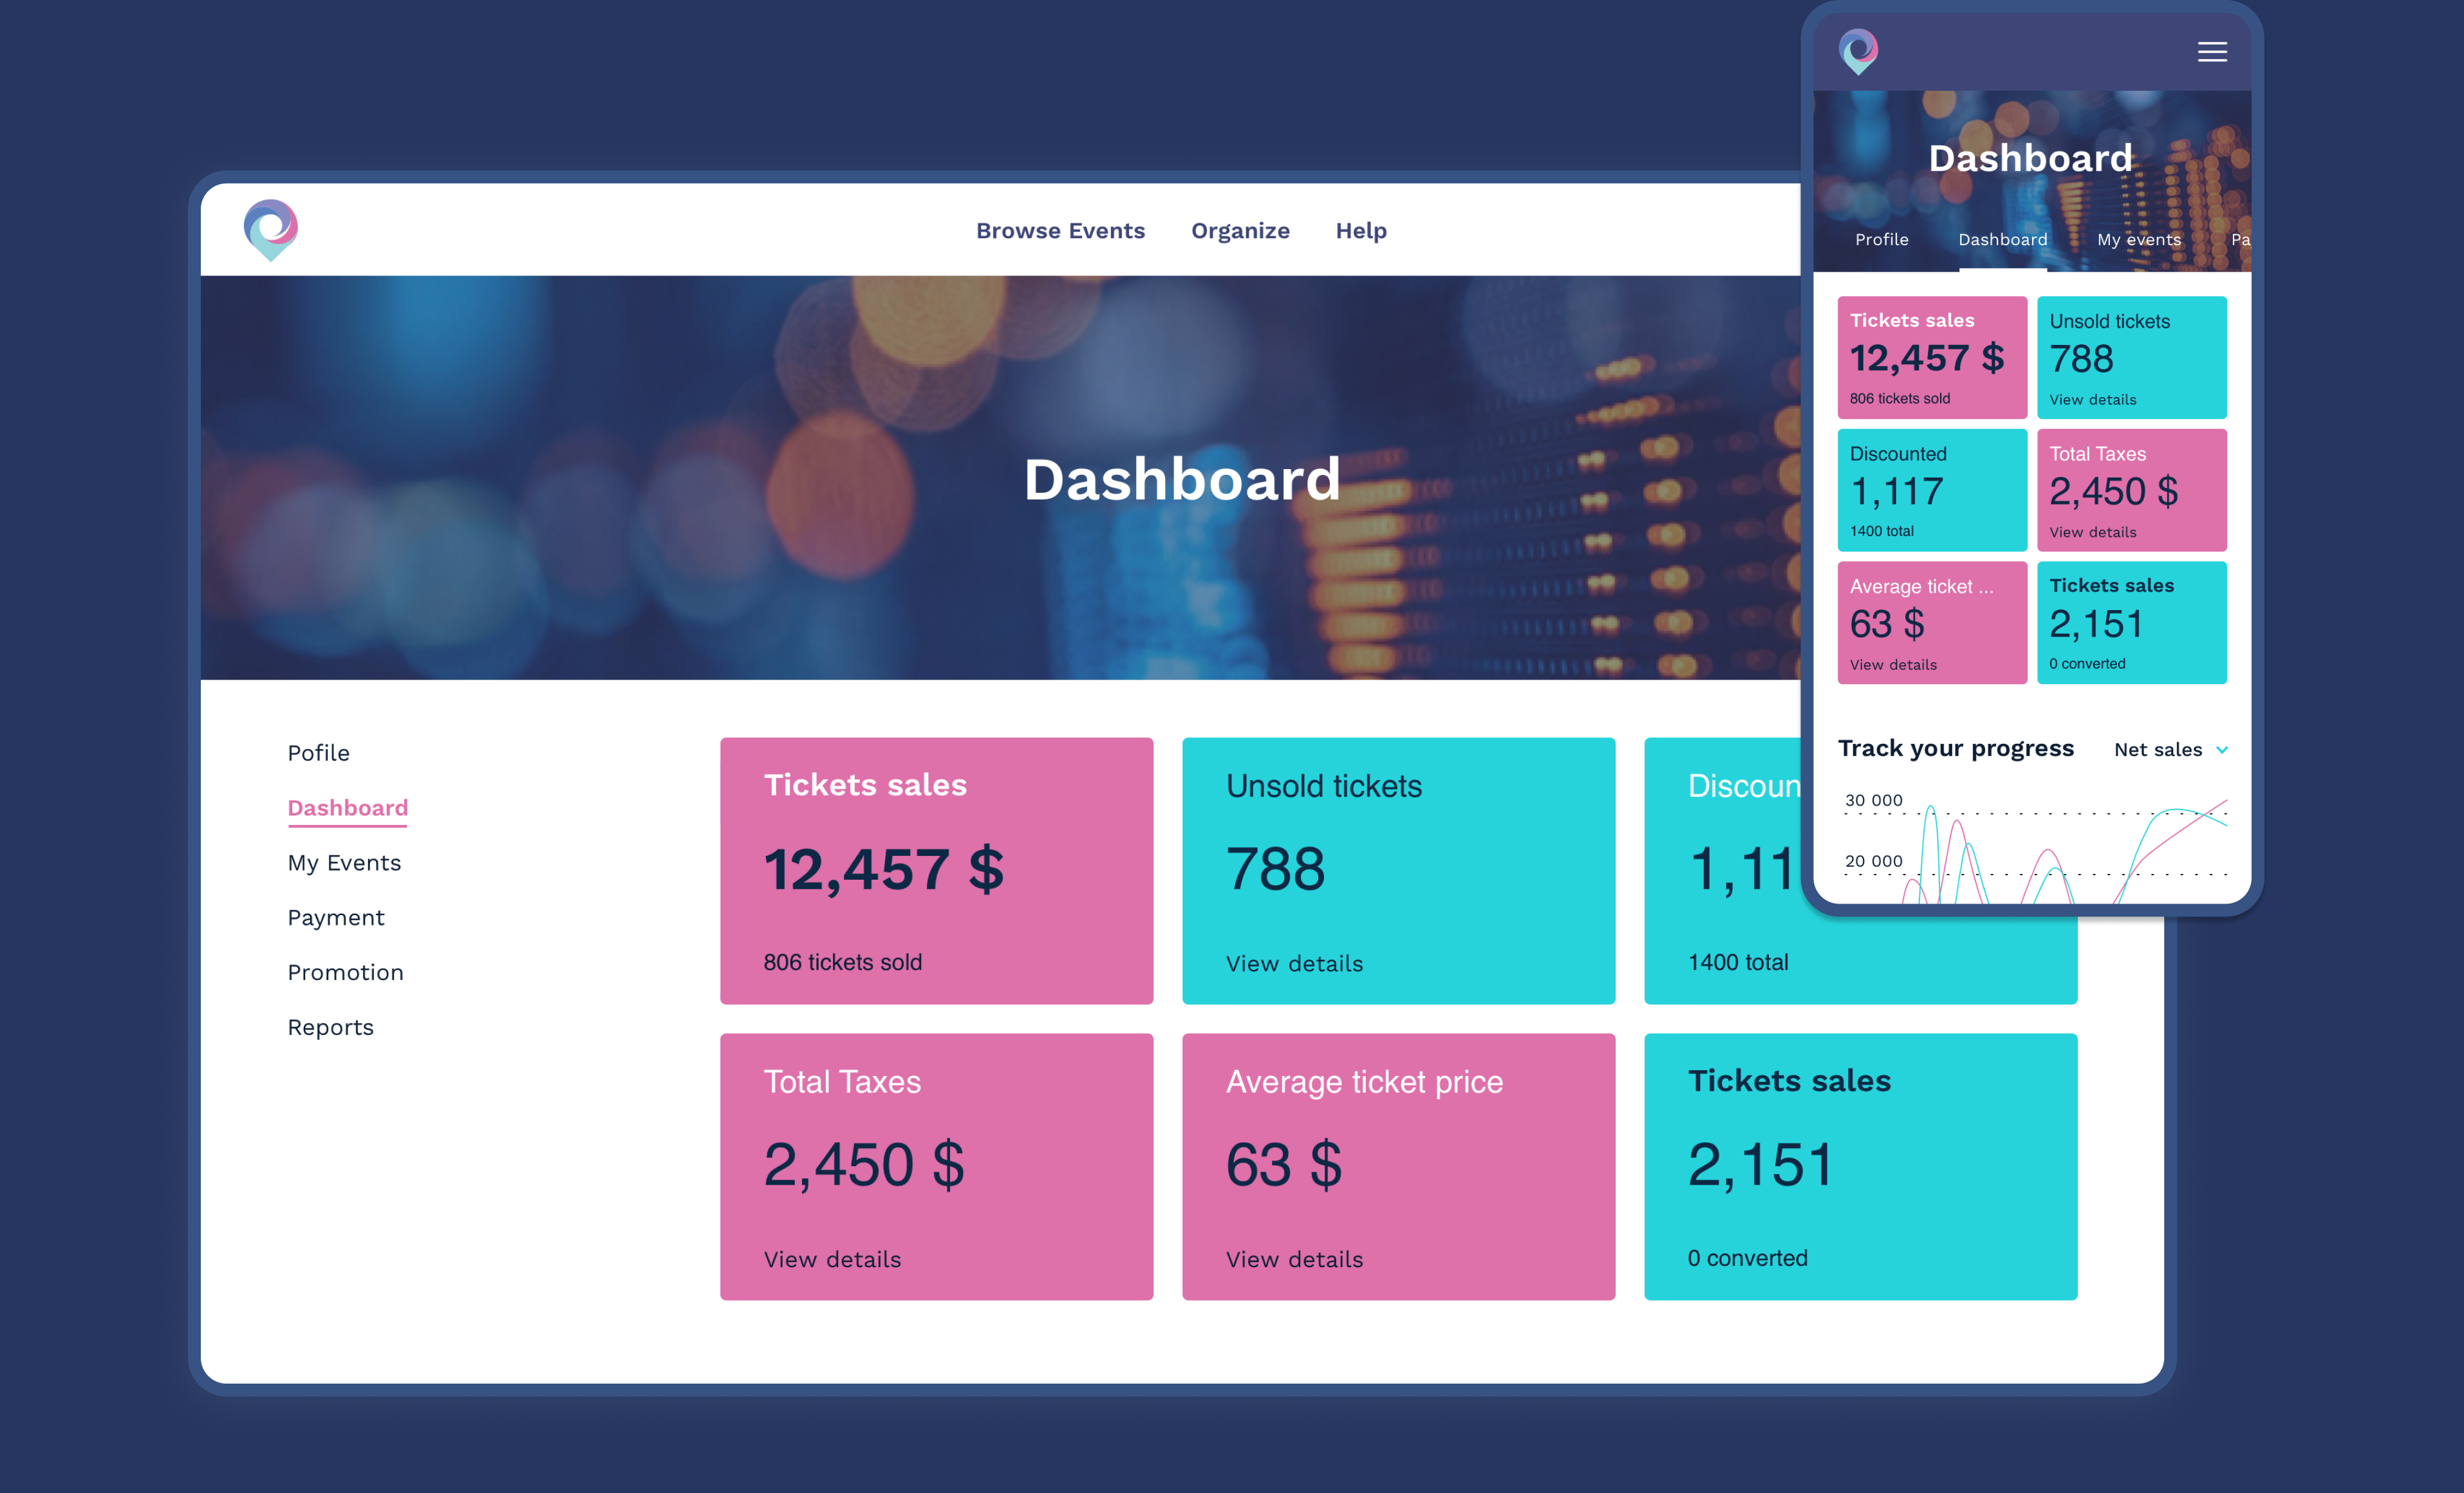 Full dashboard for all needs